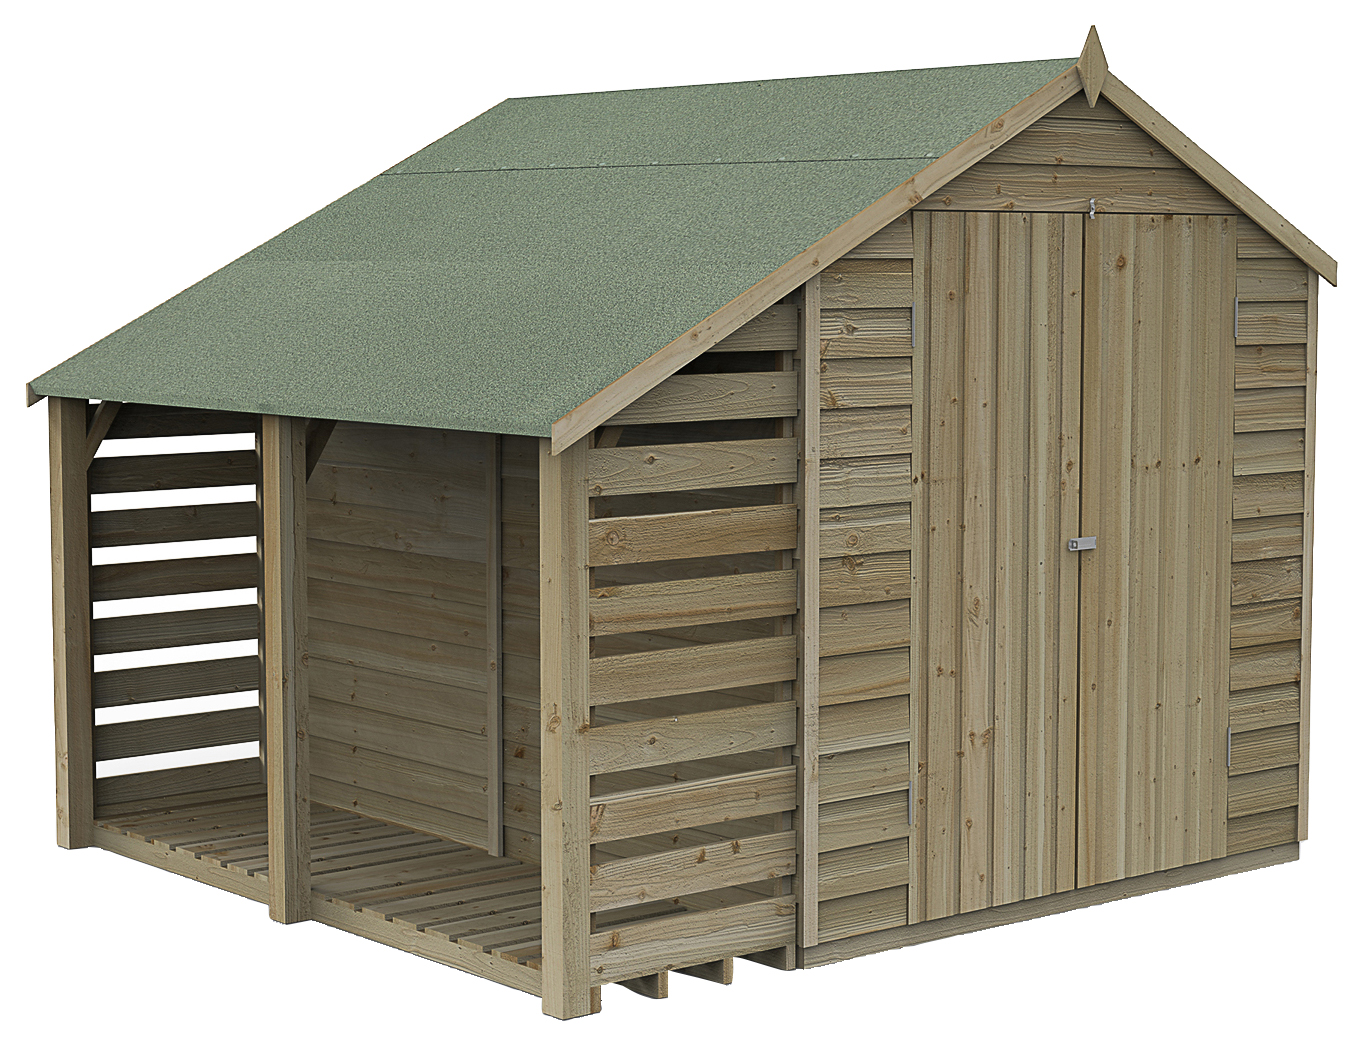 Image of Forest Garden 8 x 6ft 4Life Apex Overlap Pressure Treated Double Door Windowless Shed with Lean-To and Assembly